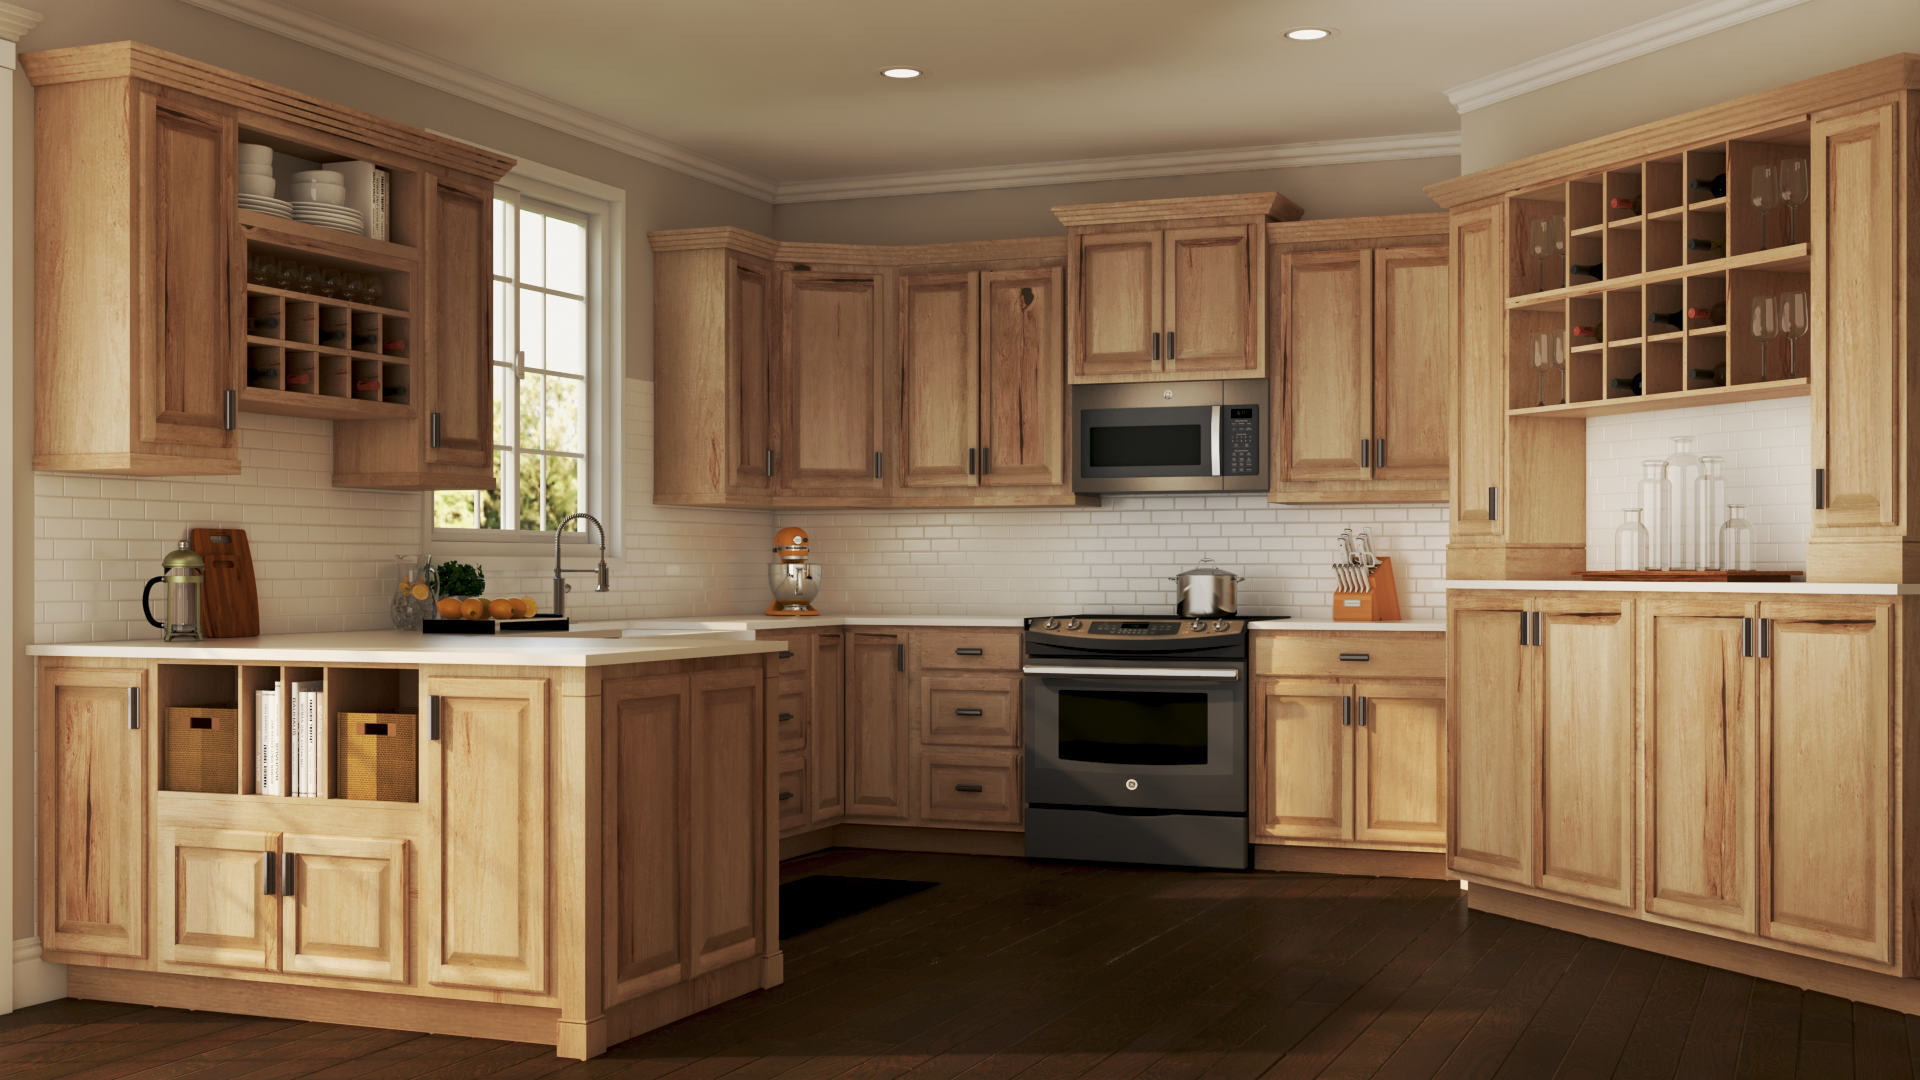 Homedepot Kitchen Cabinets Lovely Hampton Bath Cabinets In Natural Hickory Kitchen The Of Homedepot Kitchen Cabinets 